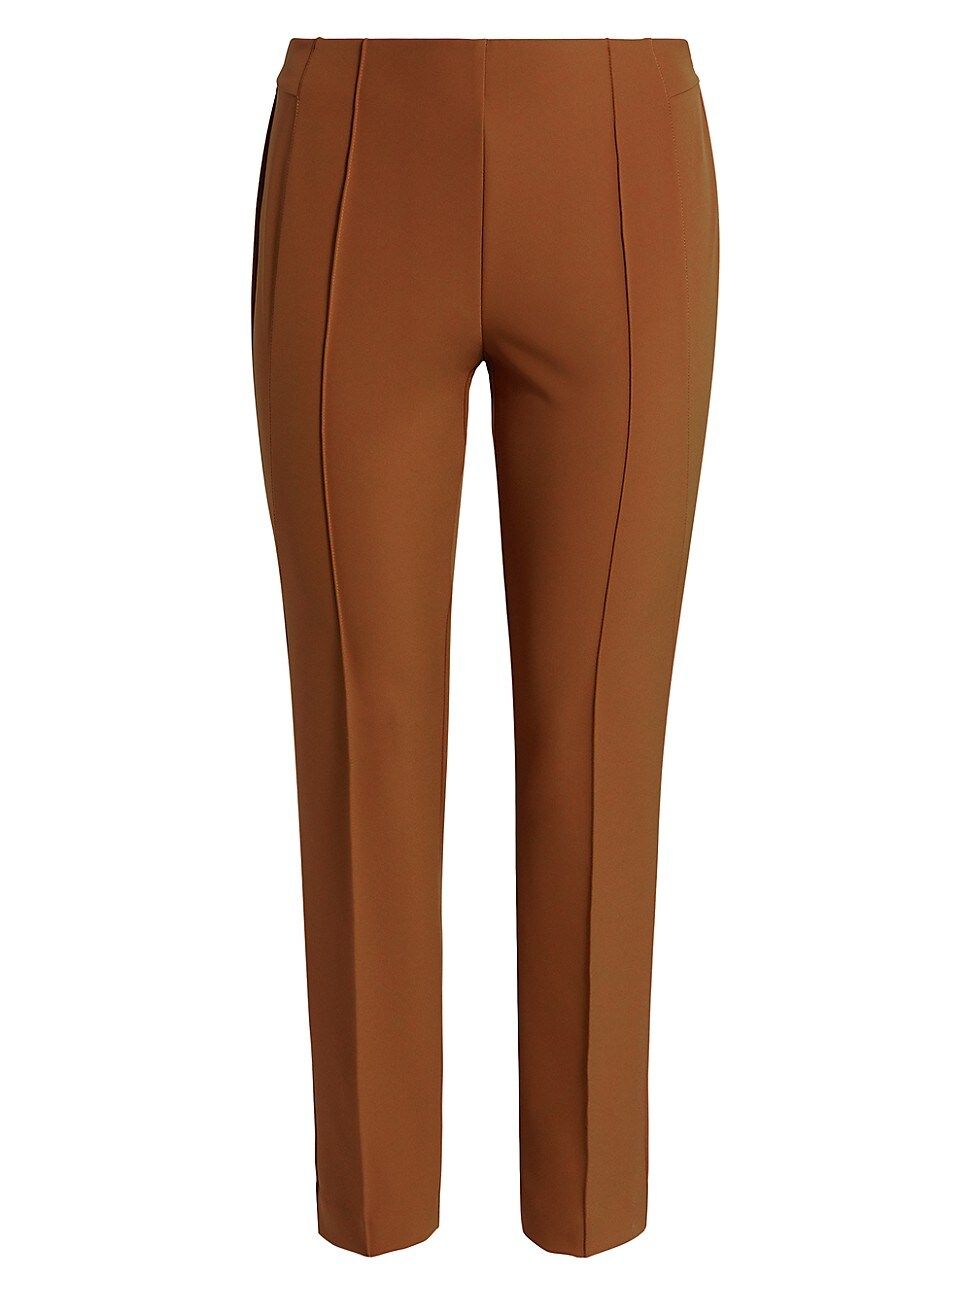 Acclaimed Stretch Gramercy Pants - Cappuccino - Size 14 - Cappuccino - Size 14 | Saks Fifth Avenue